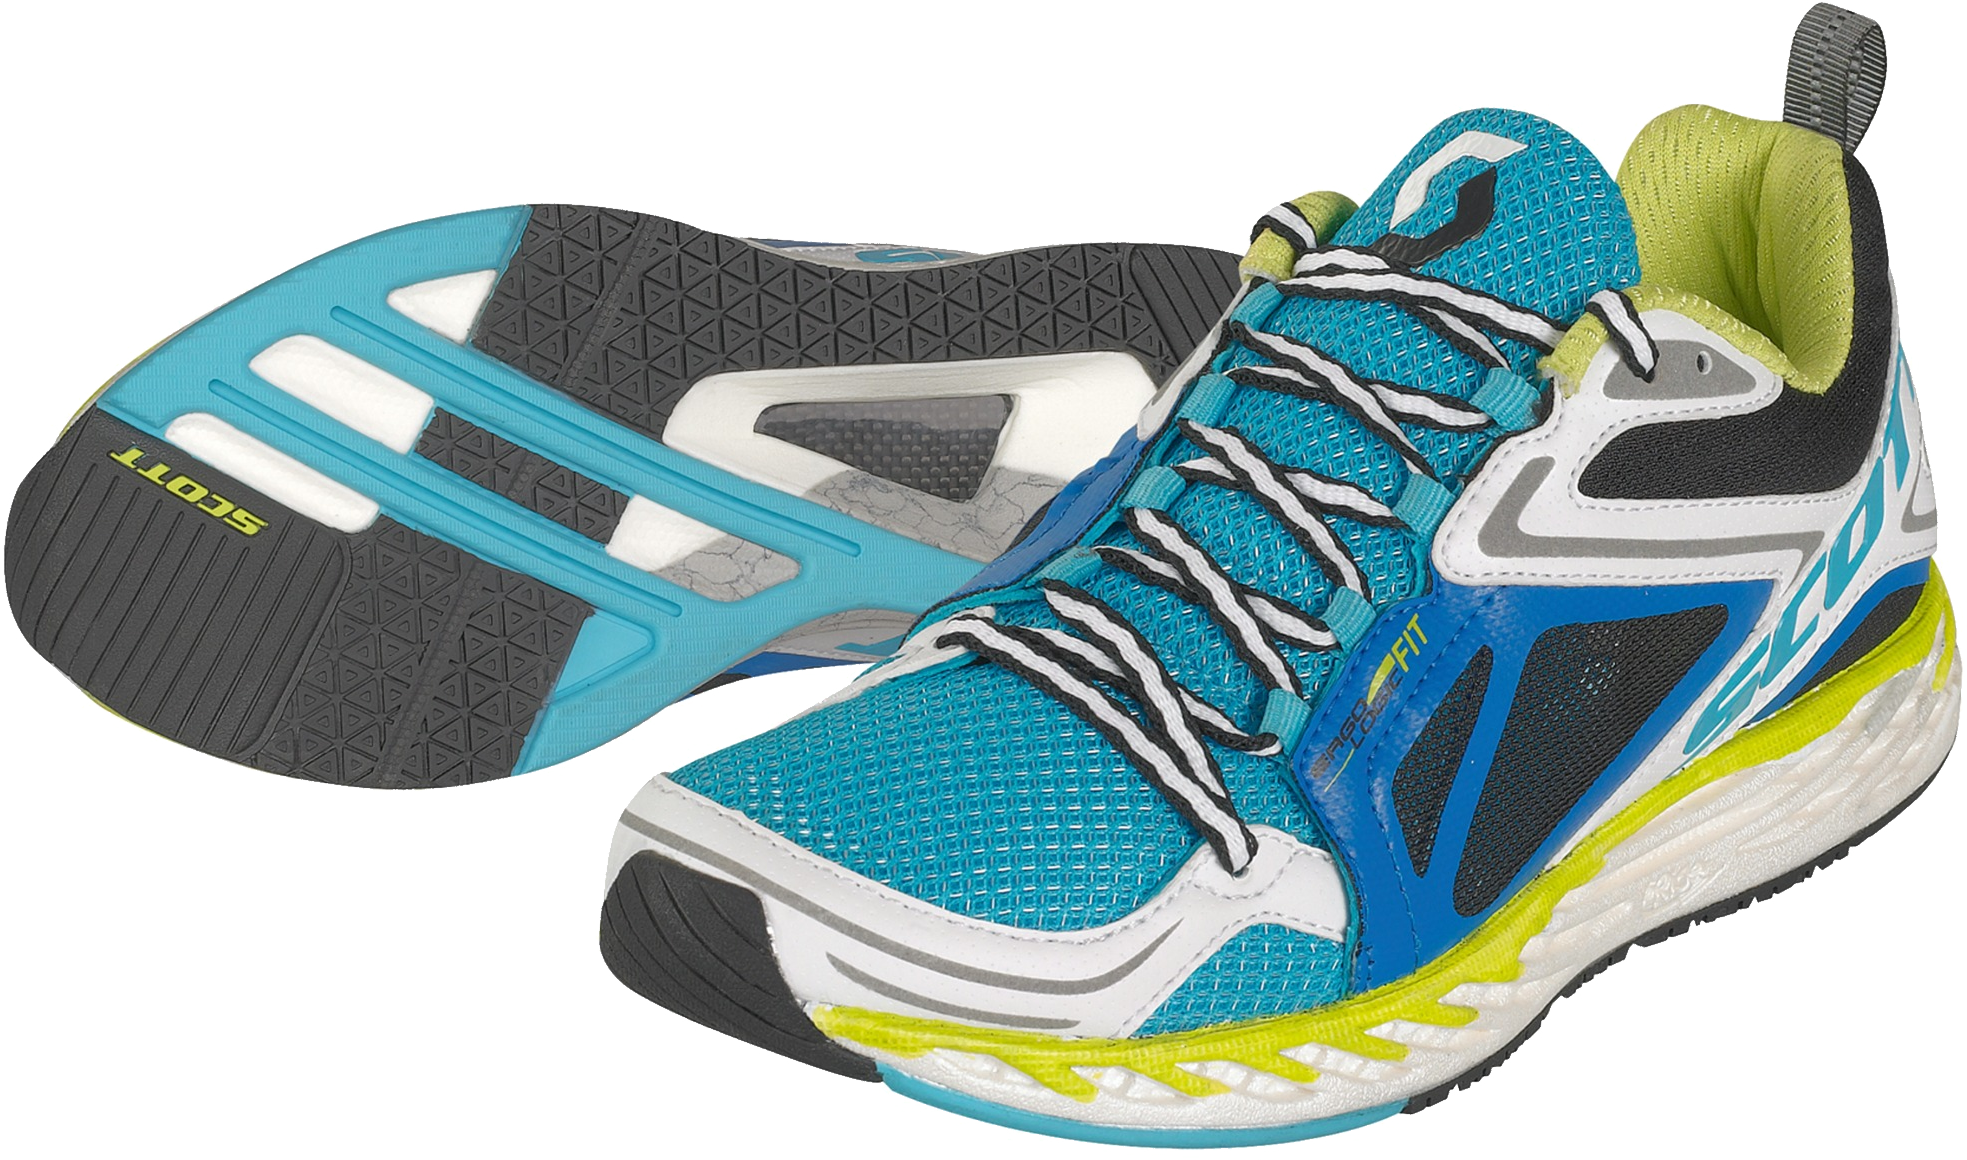 Running shoes PNG image transparent image download, size: 1967x1160px